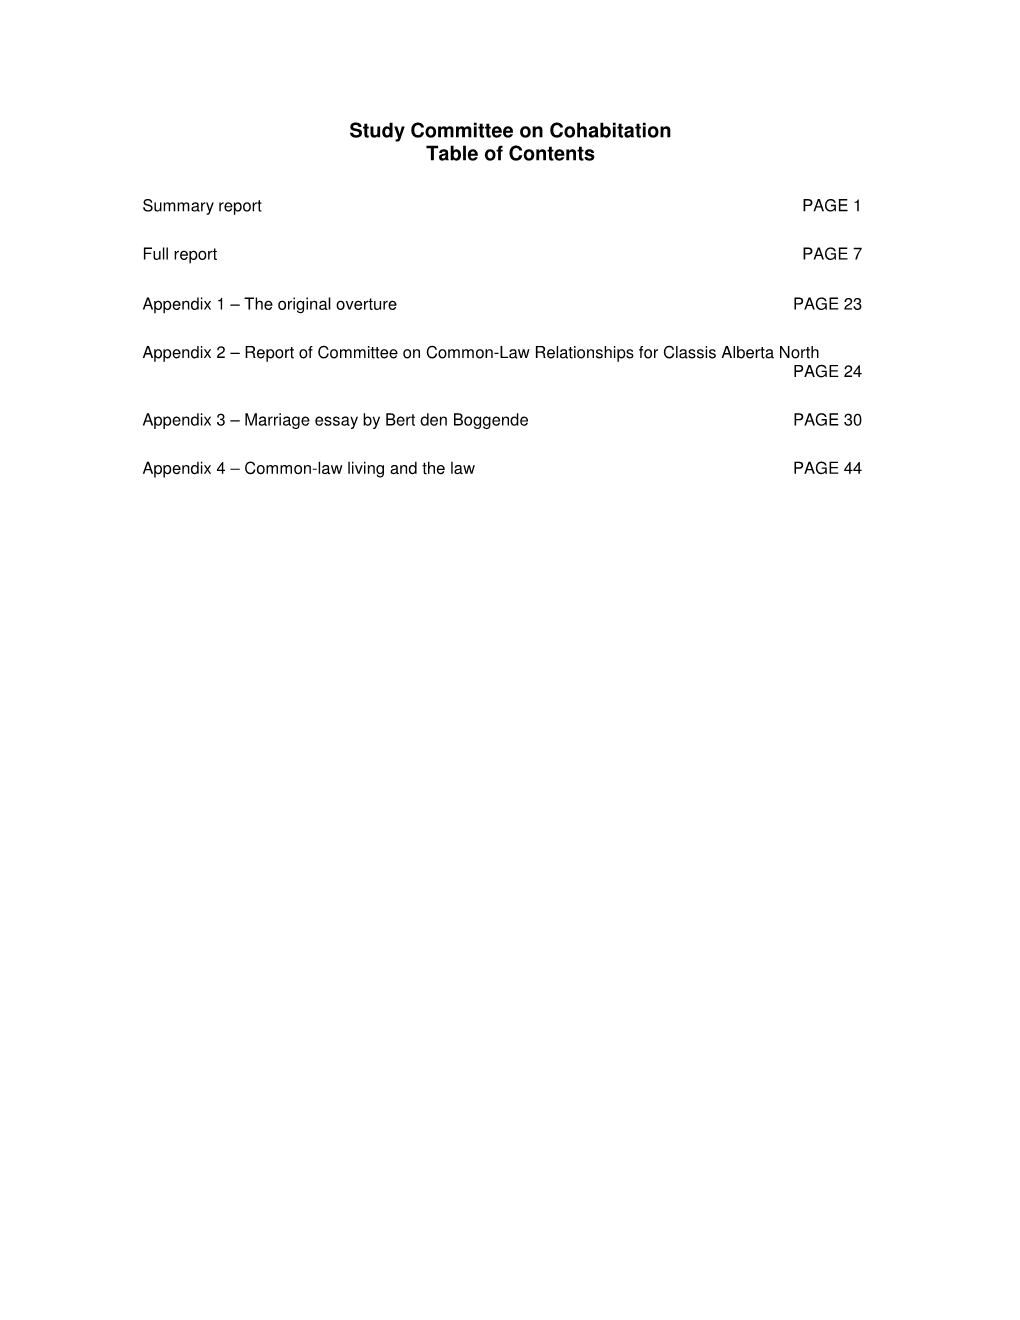 Study Committee on Cohabitation Table of Contents